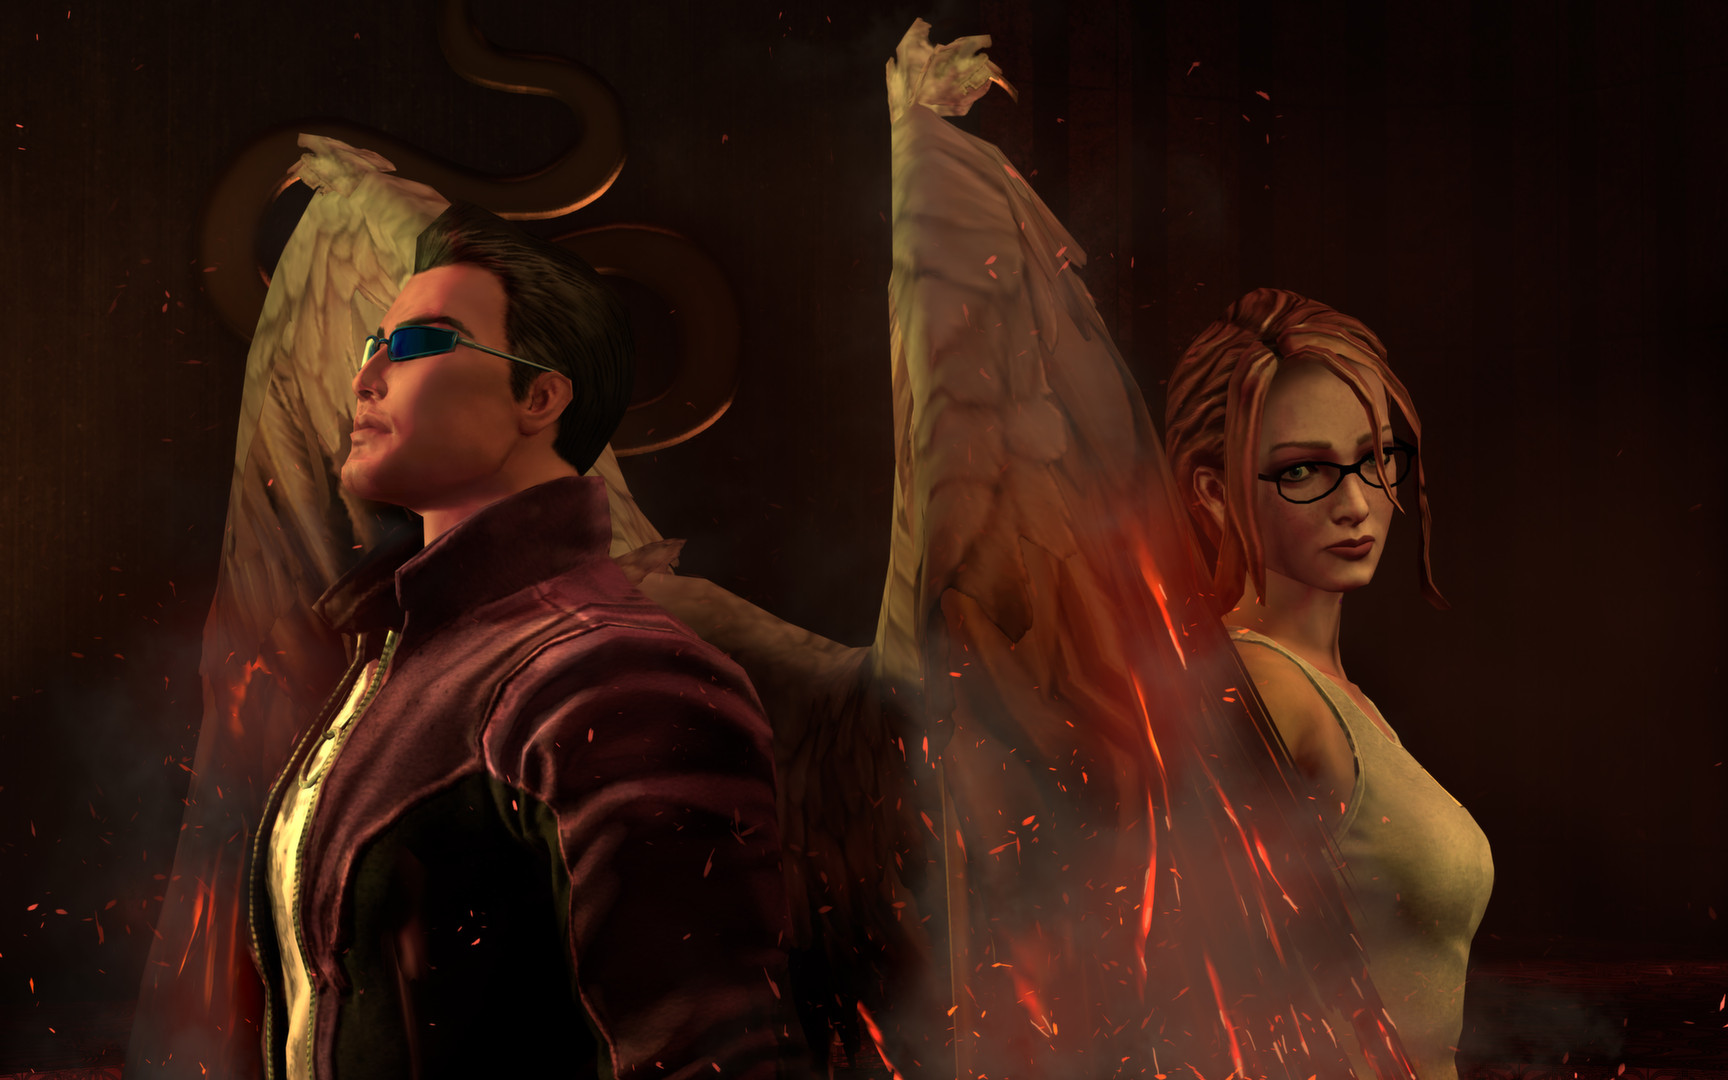 Saints Row: Gat out of Hell on Steam